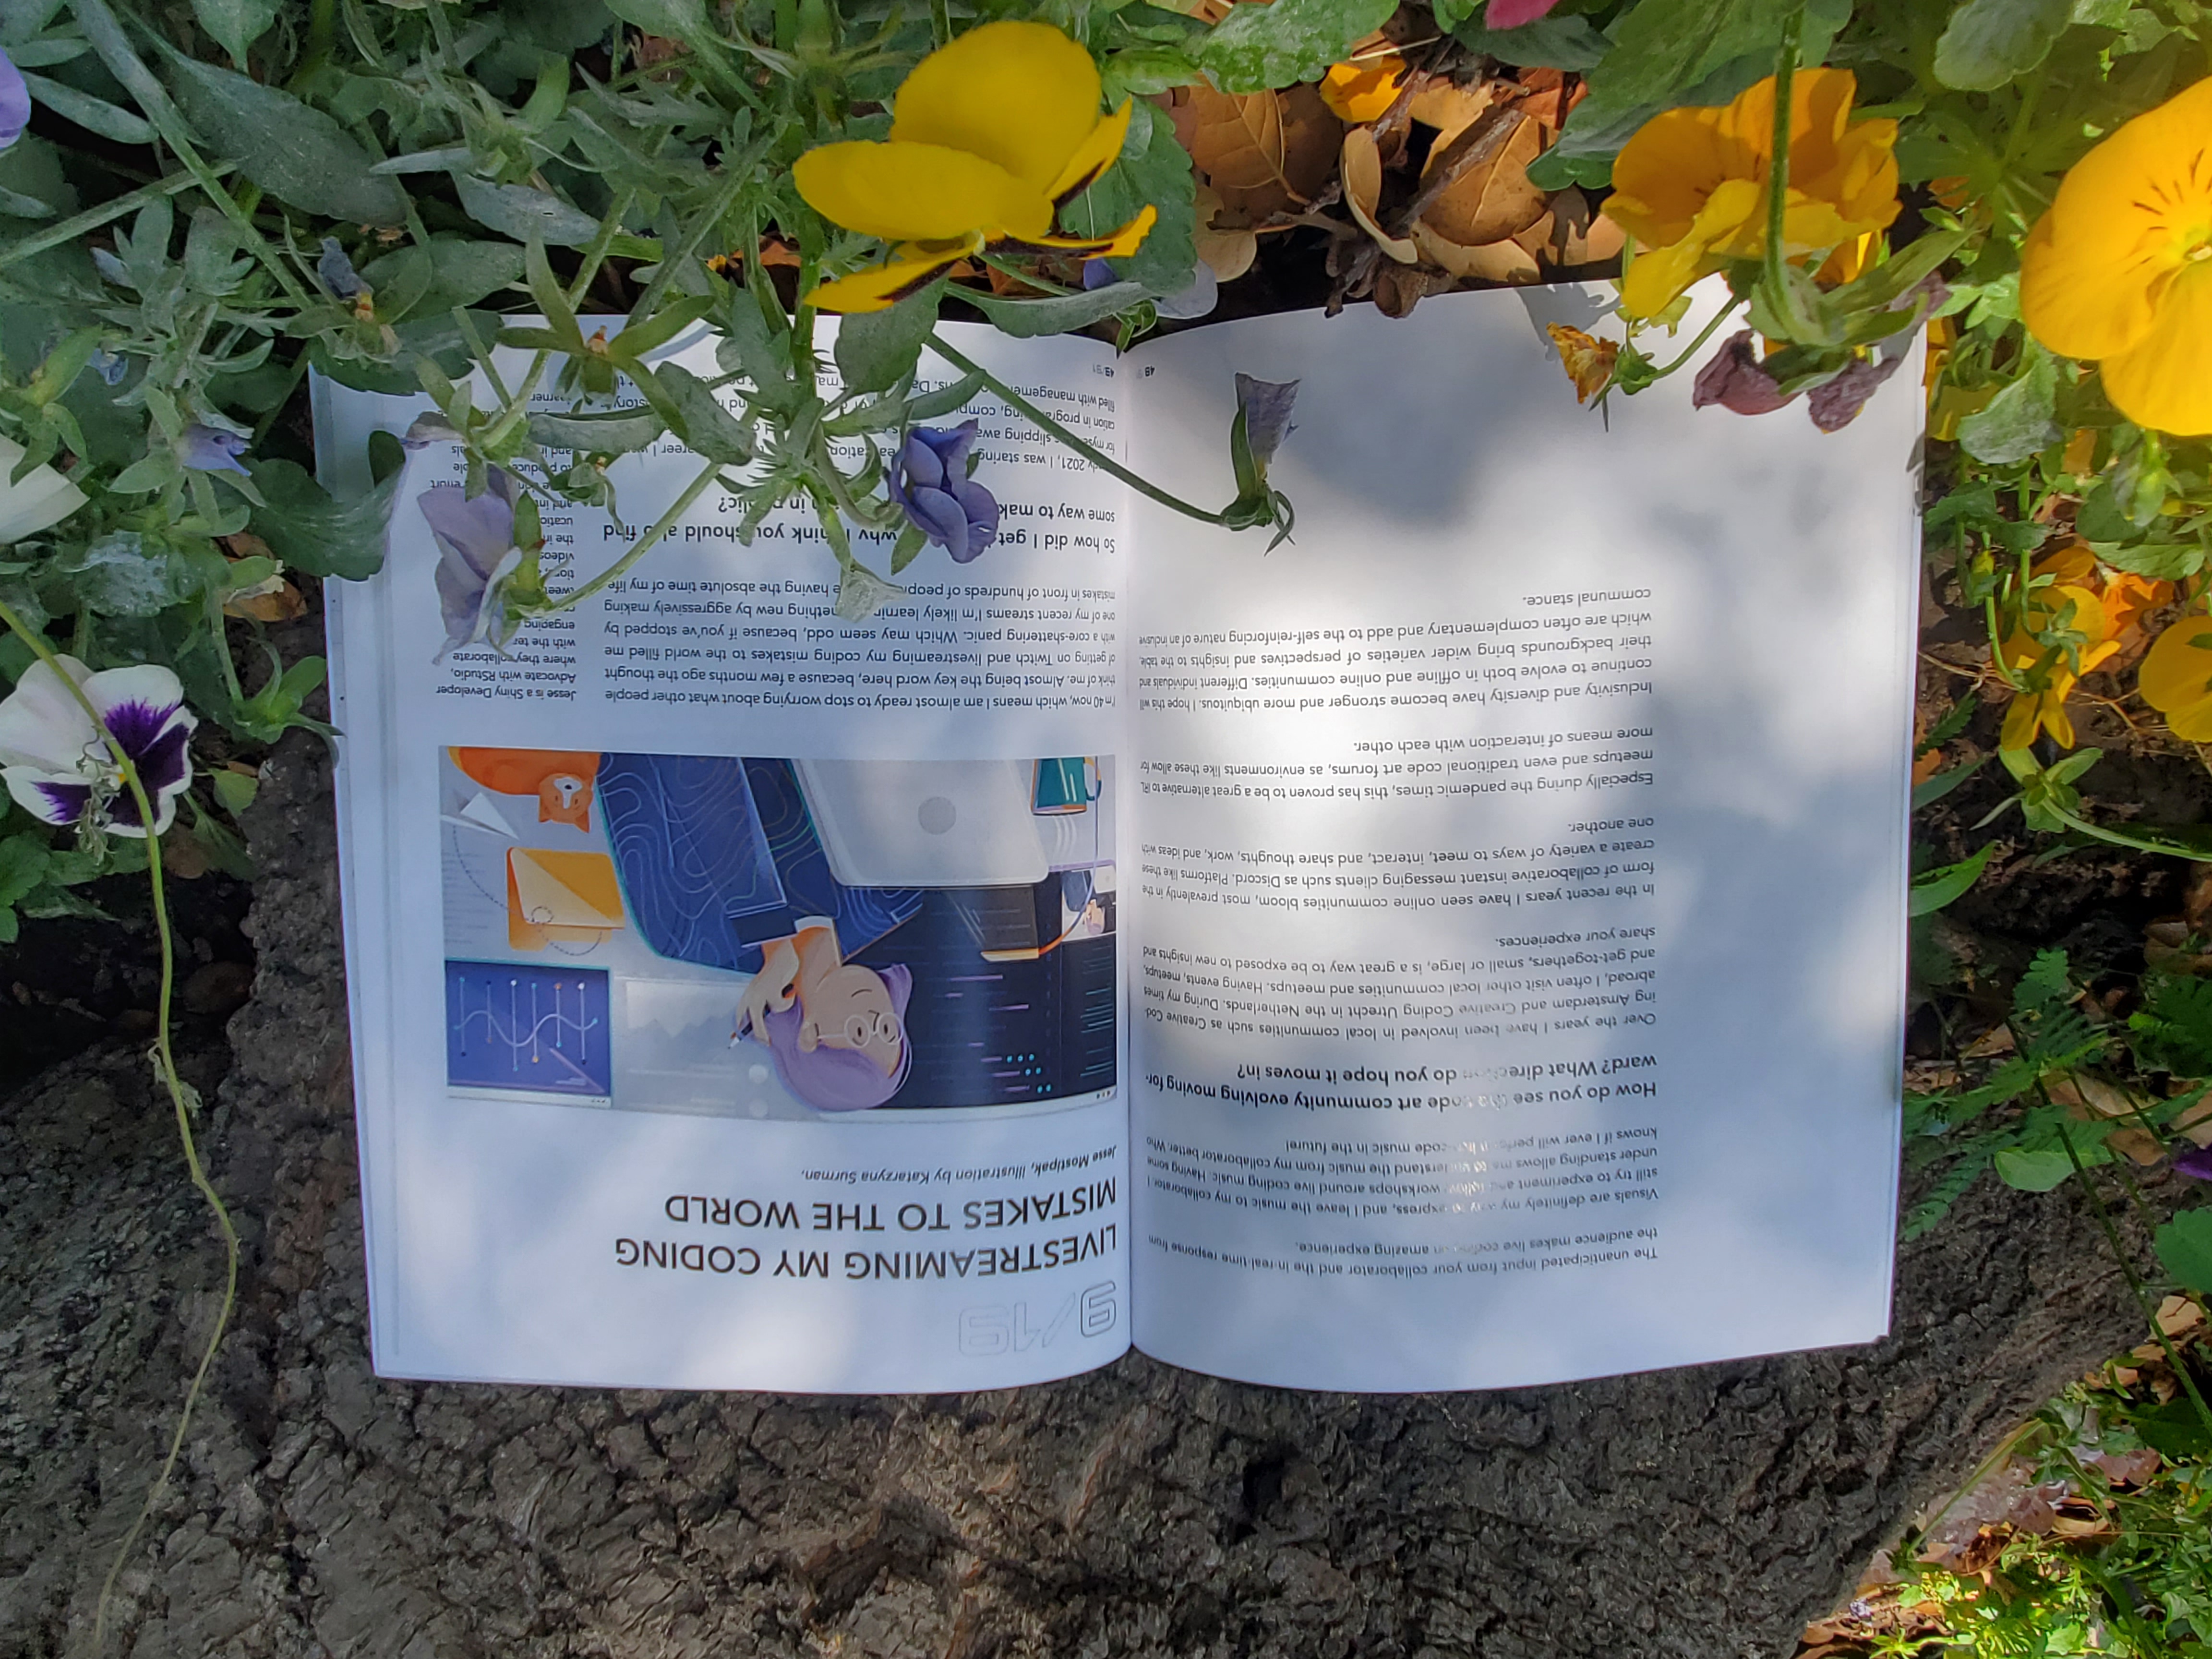 Photograph of an open book with illustration and text in a garden with yellow flowers